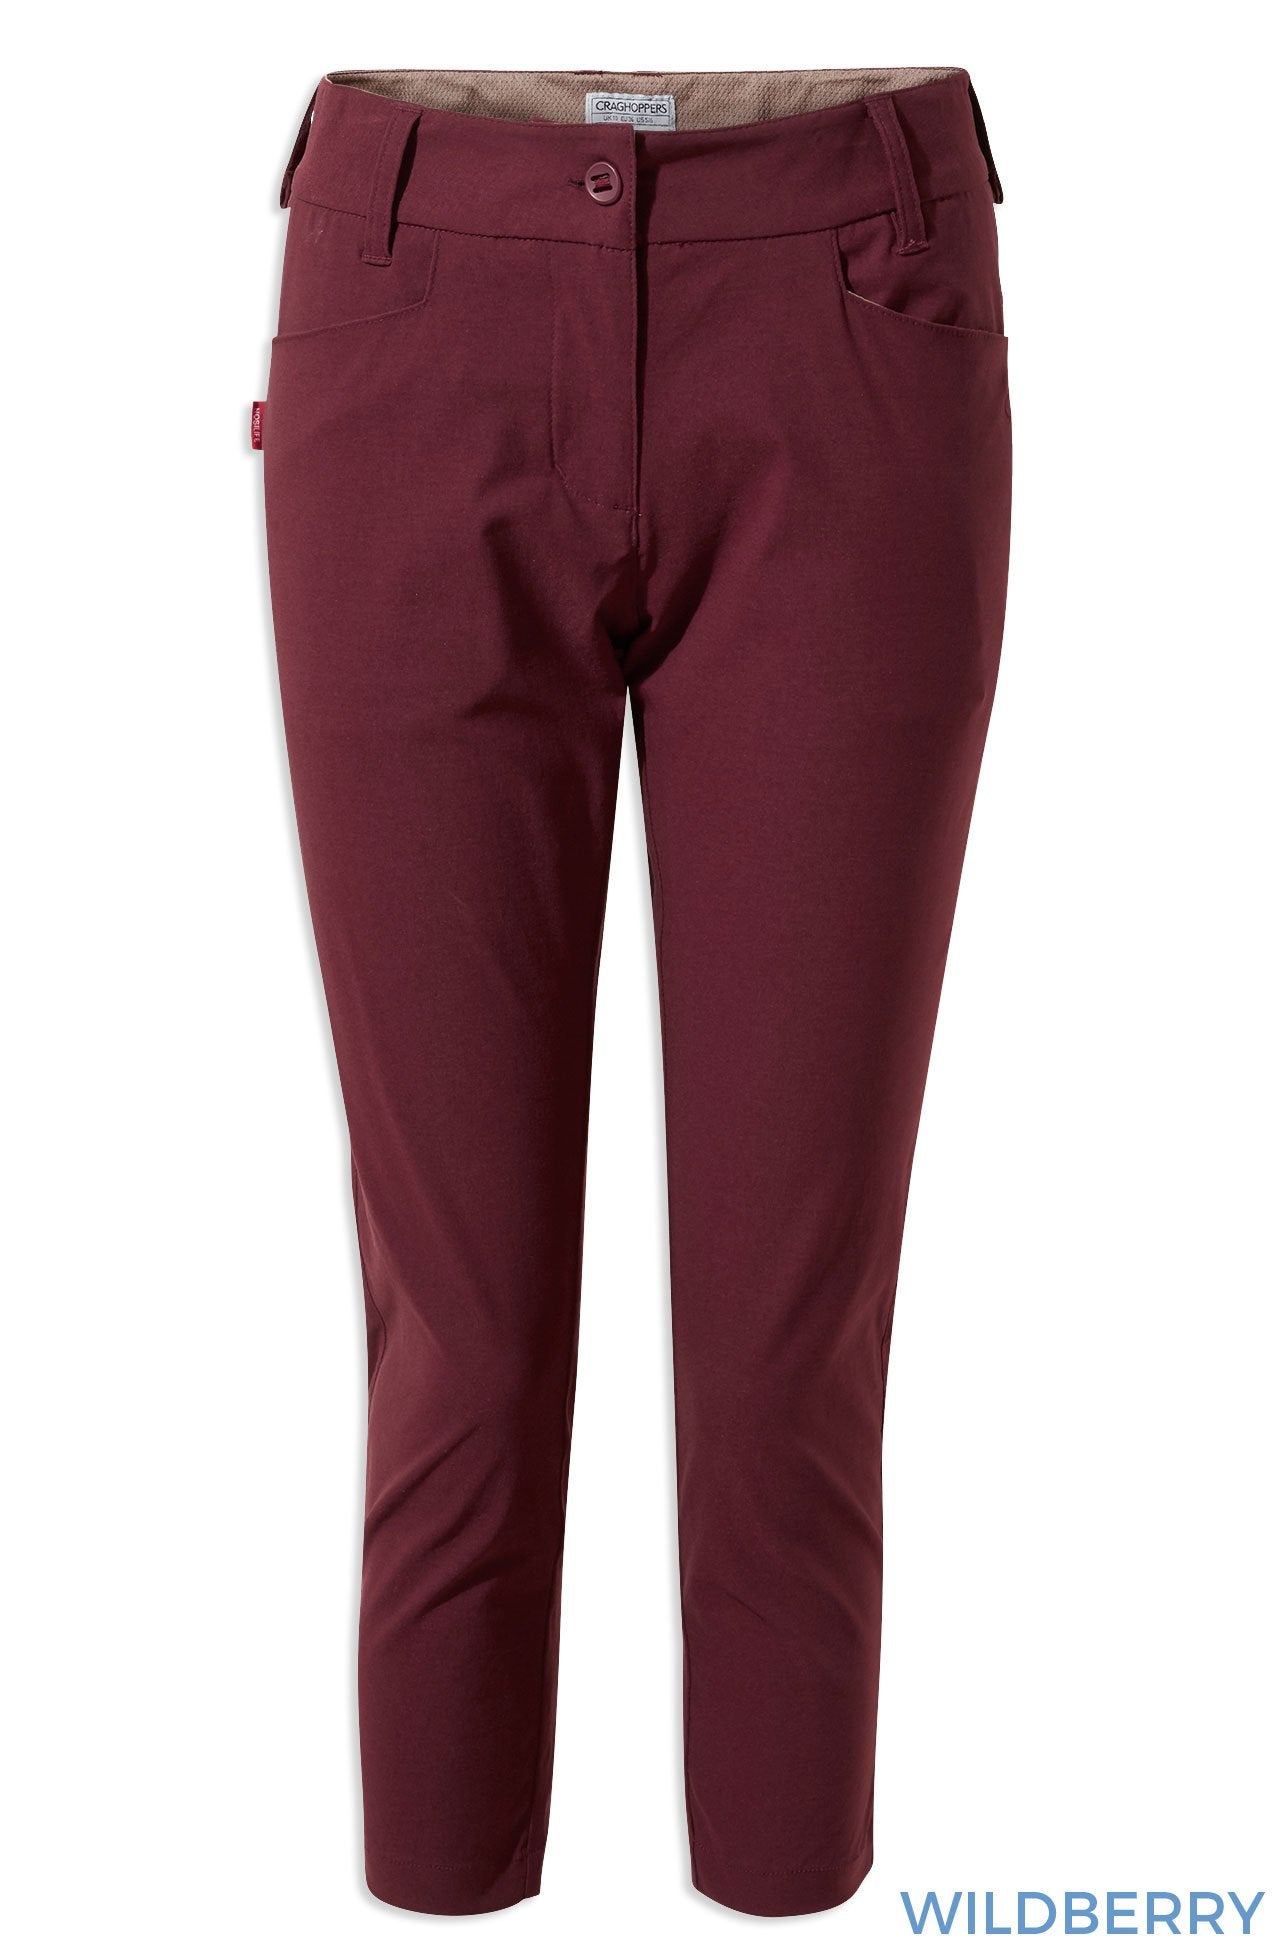 Wildberry Craghoppers NosiLife Clara Crop Trousers